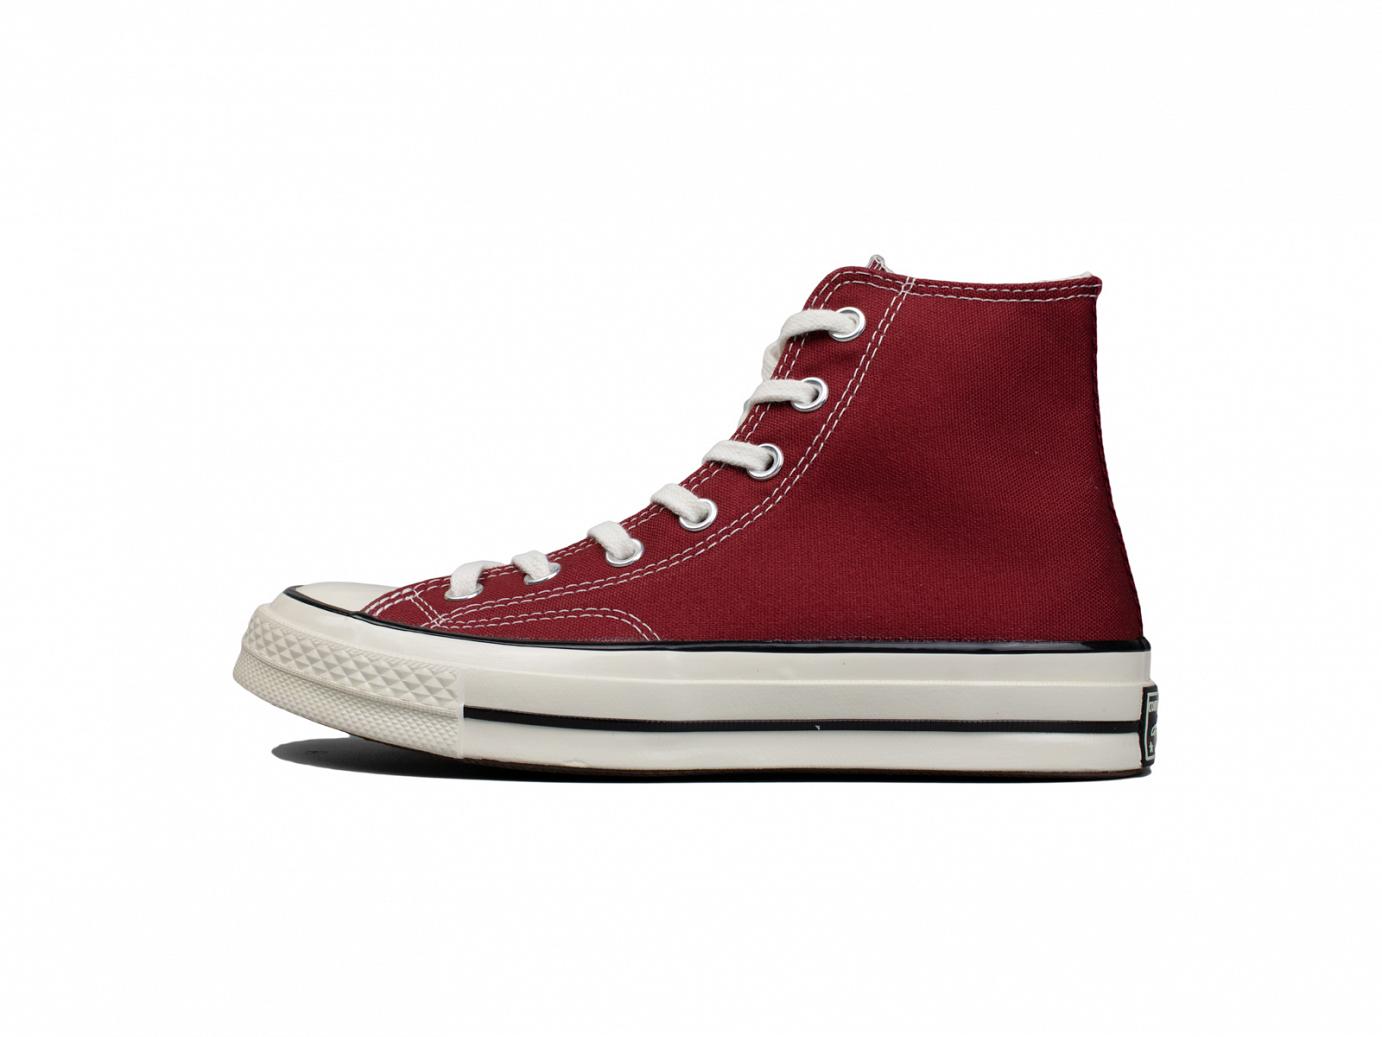 converse red maroon